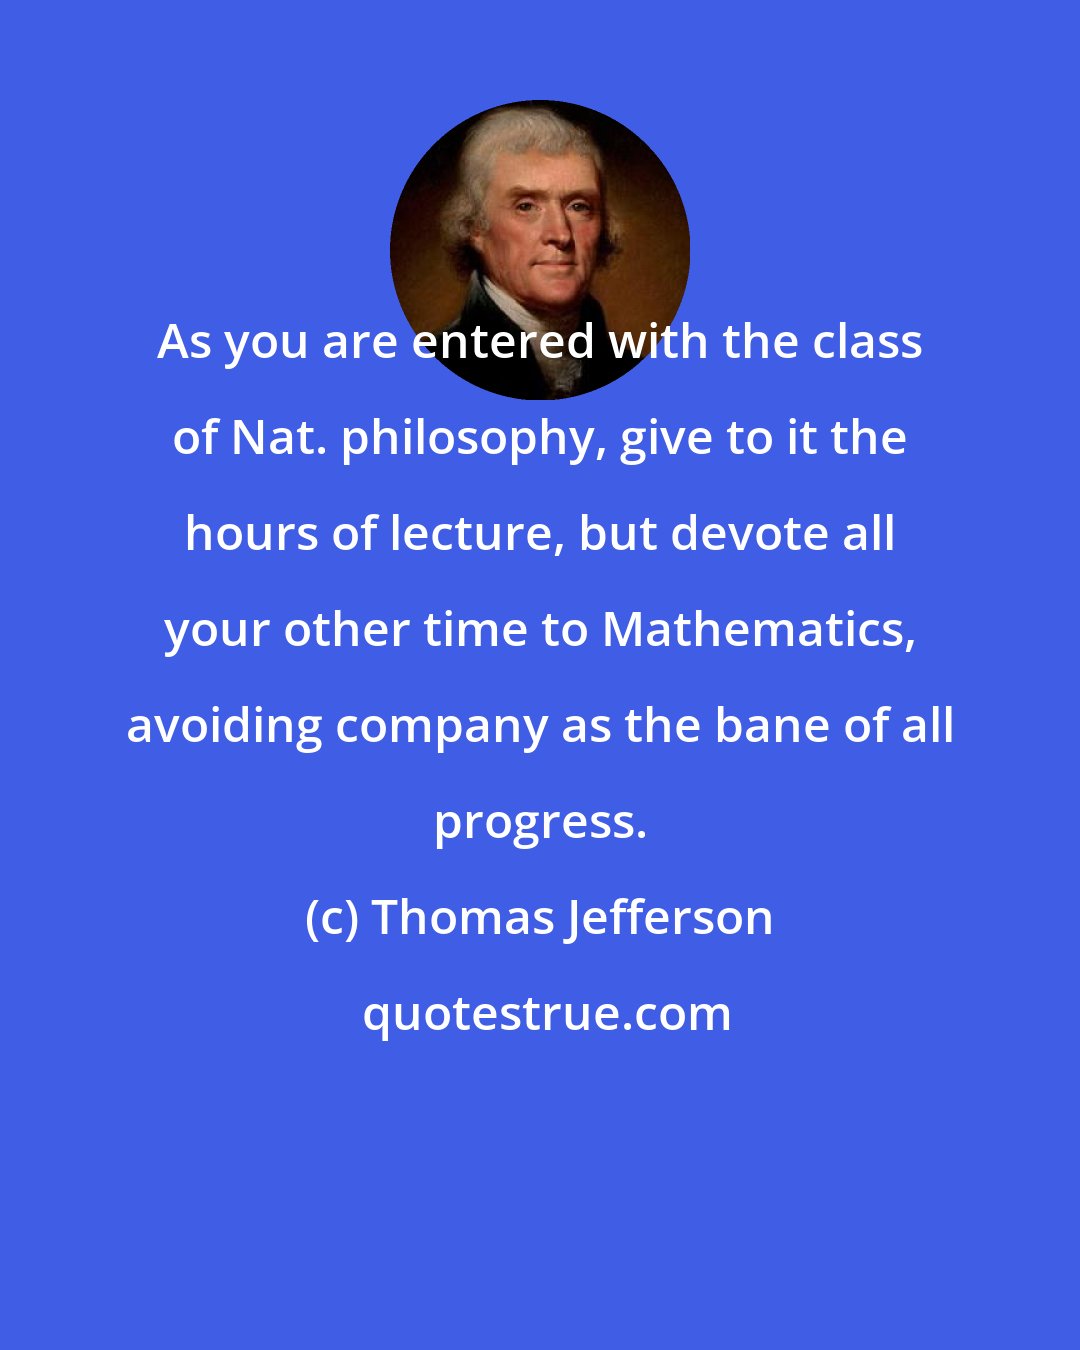 Thomas Jefferson: As you are entered with the class of Nat. philosophy, give to it the hours of lecture, but devote all your other time to Mathematics, avoiding company as the bane of all progress.